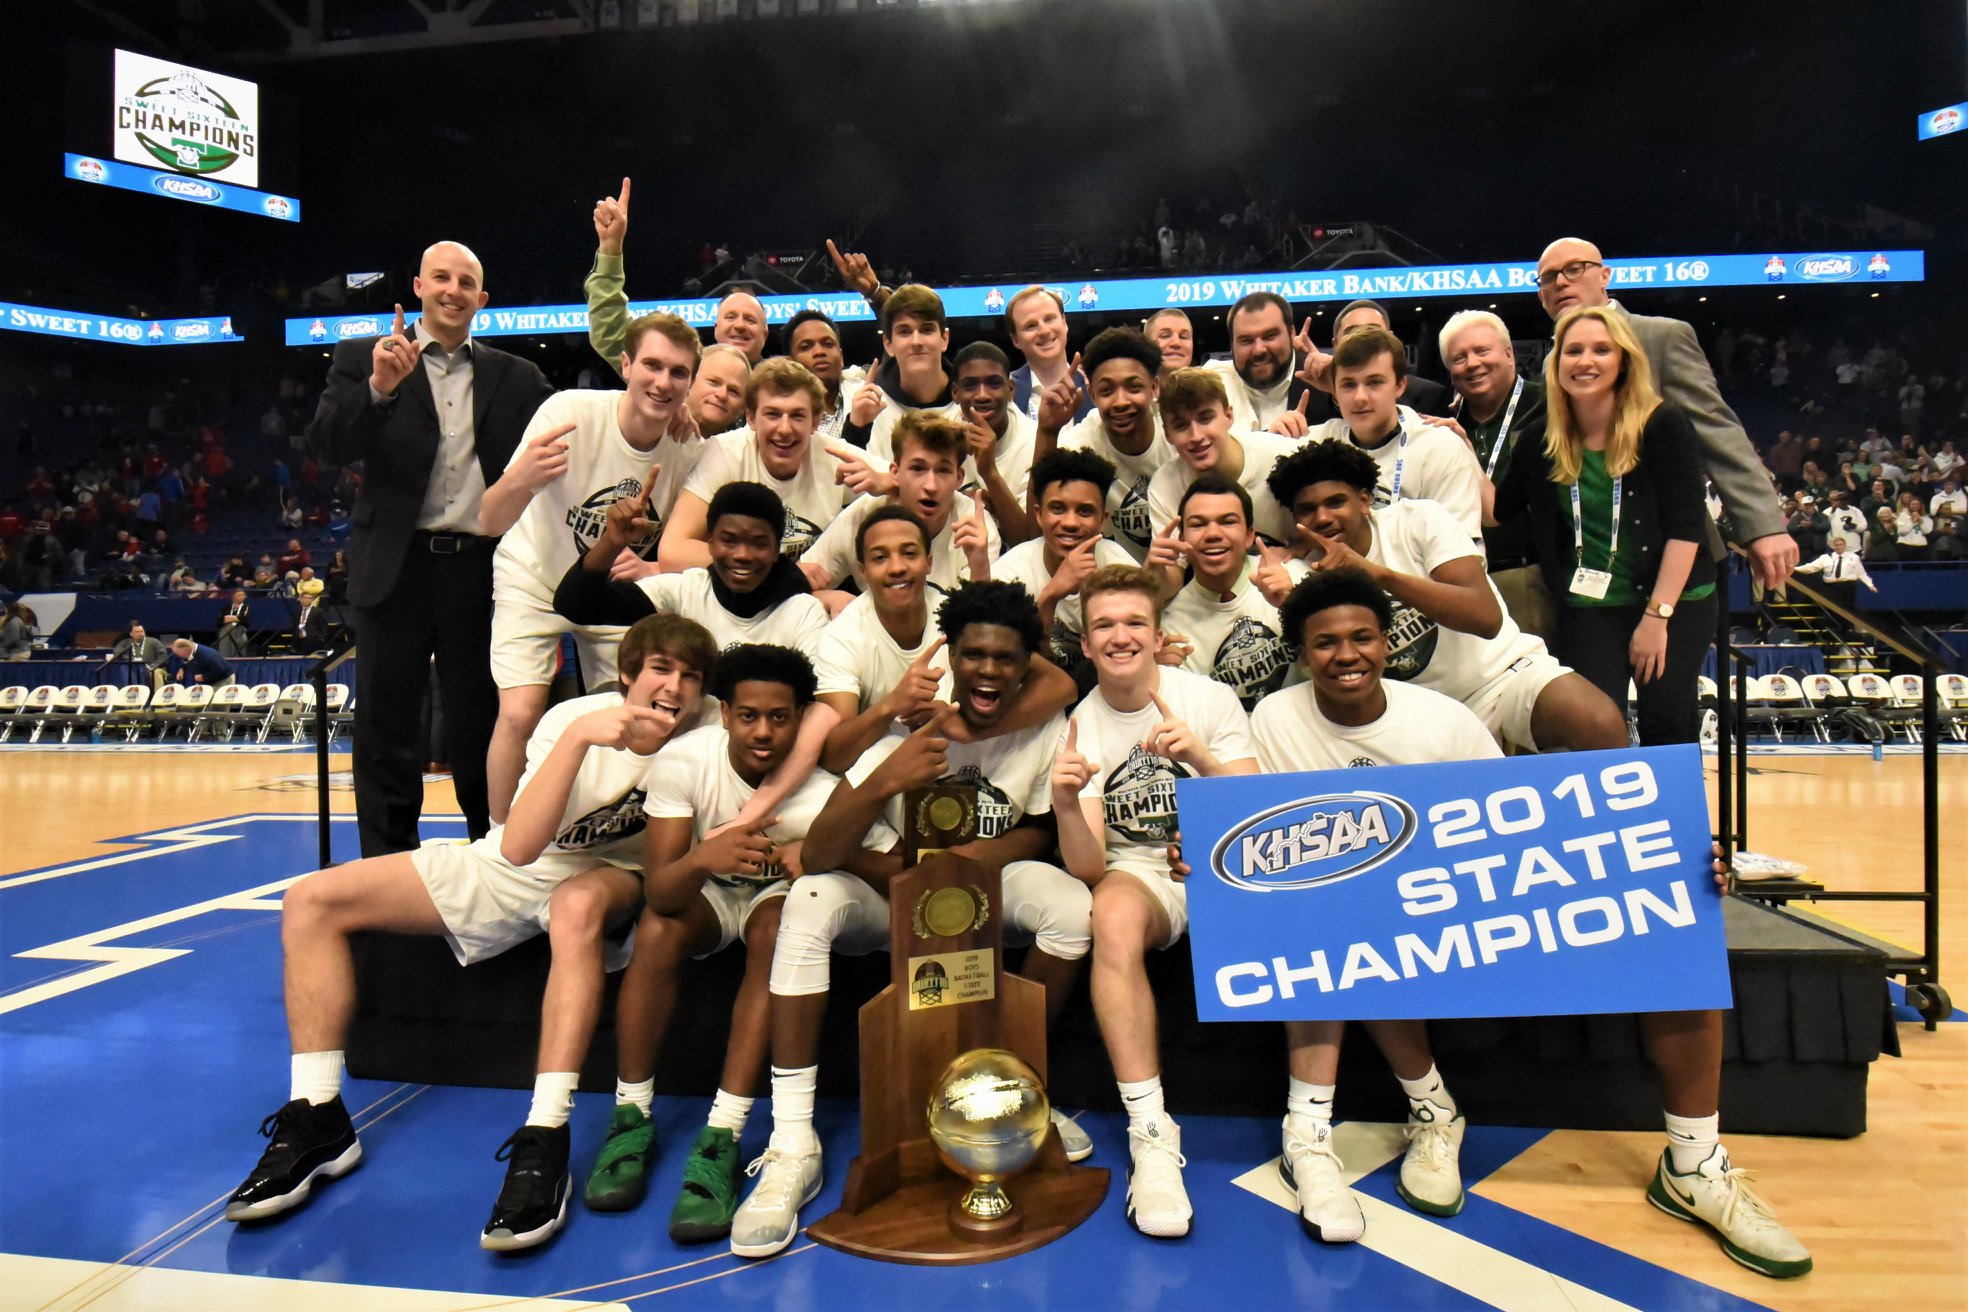 2019 state champs - basketball team on the court